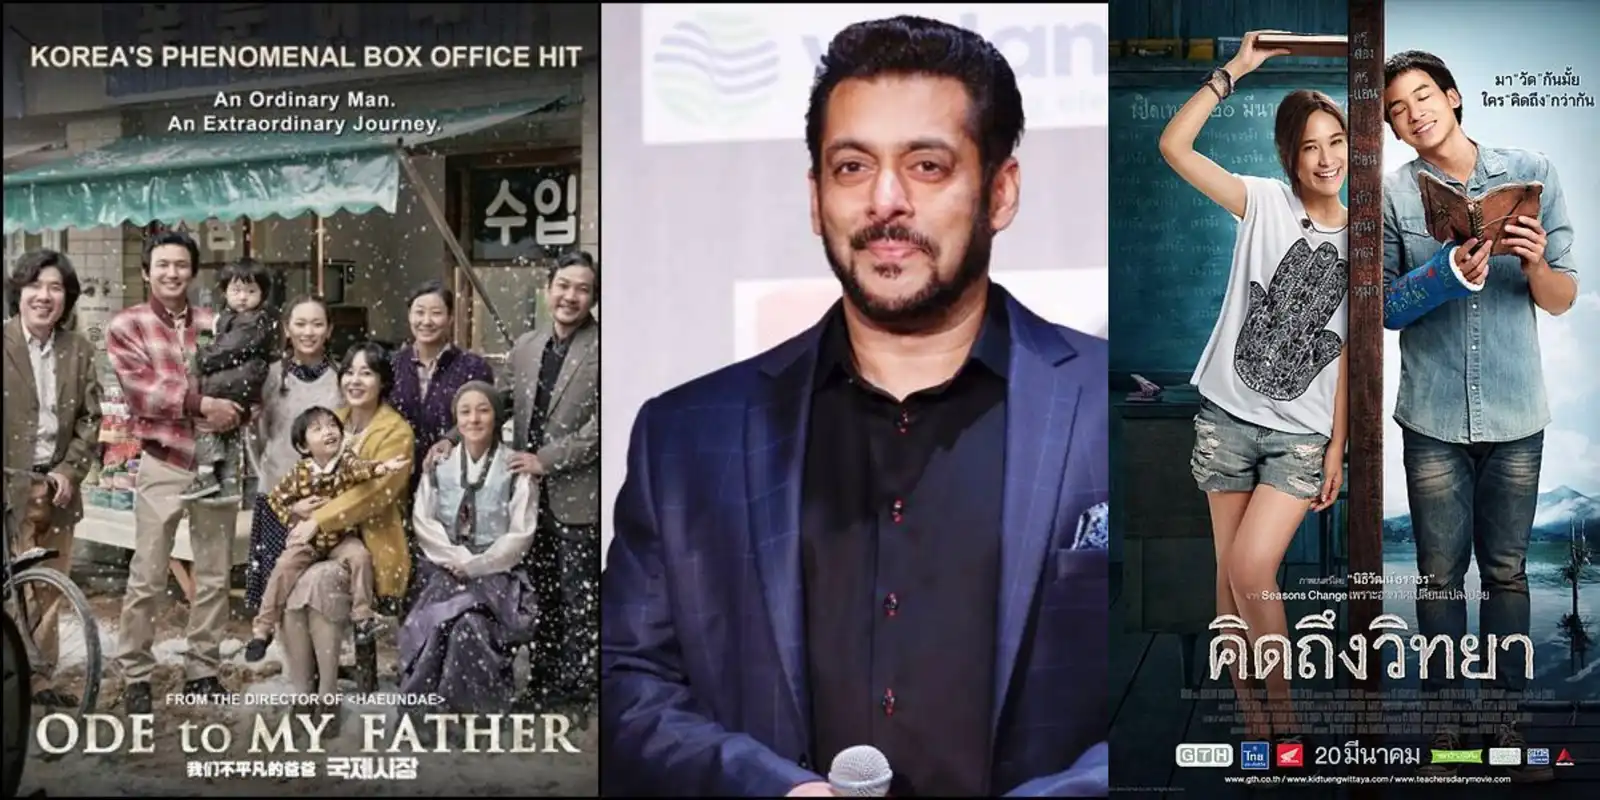 What Is With Salman Khan Copying Korean Films These Days?